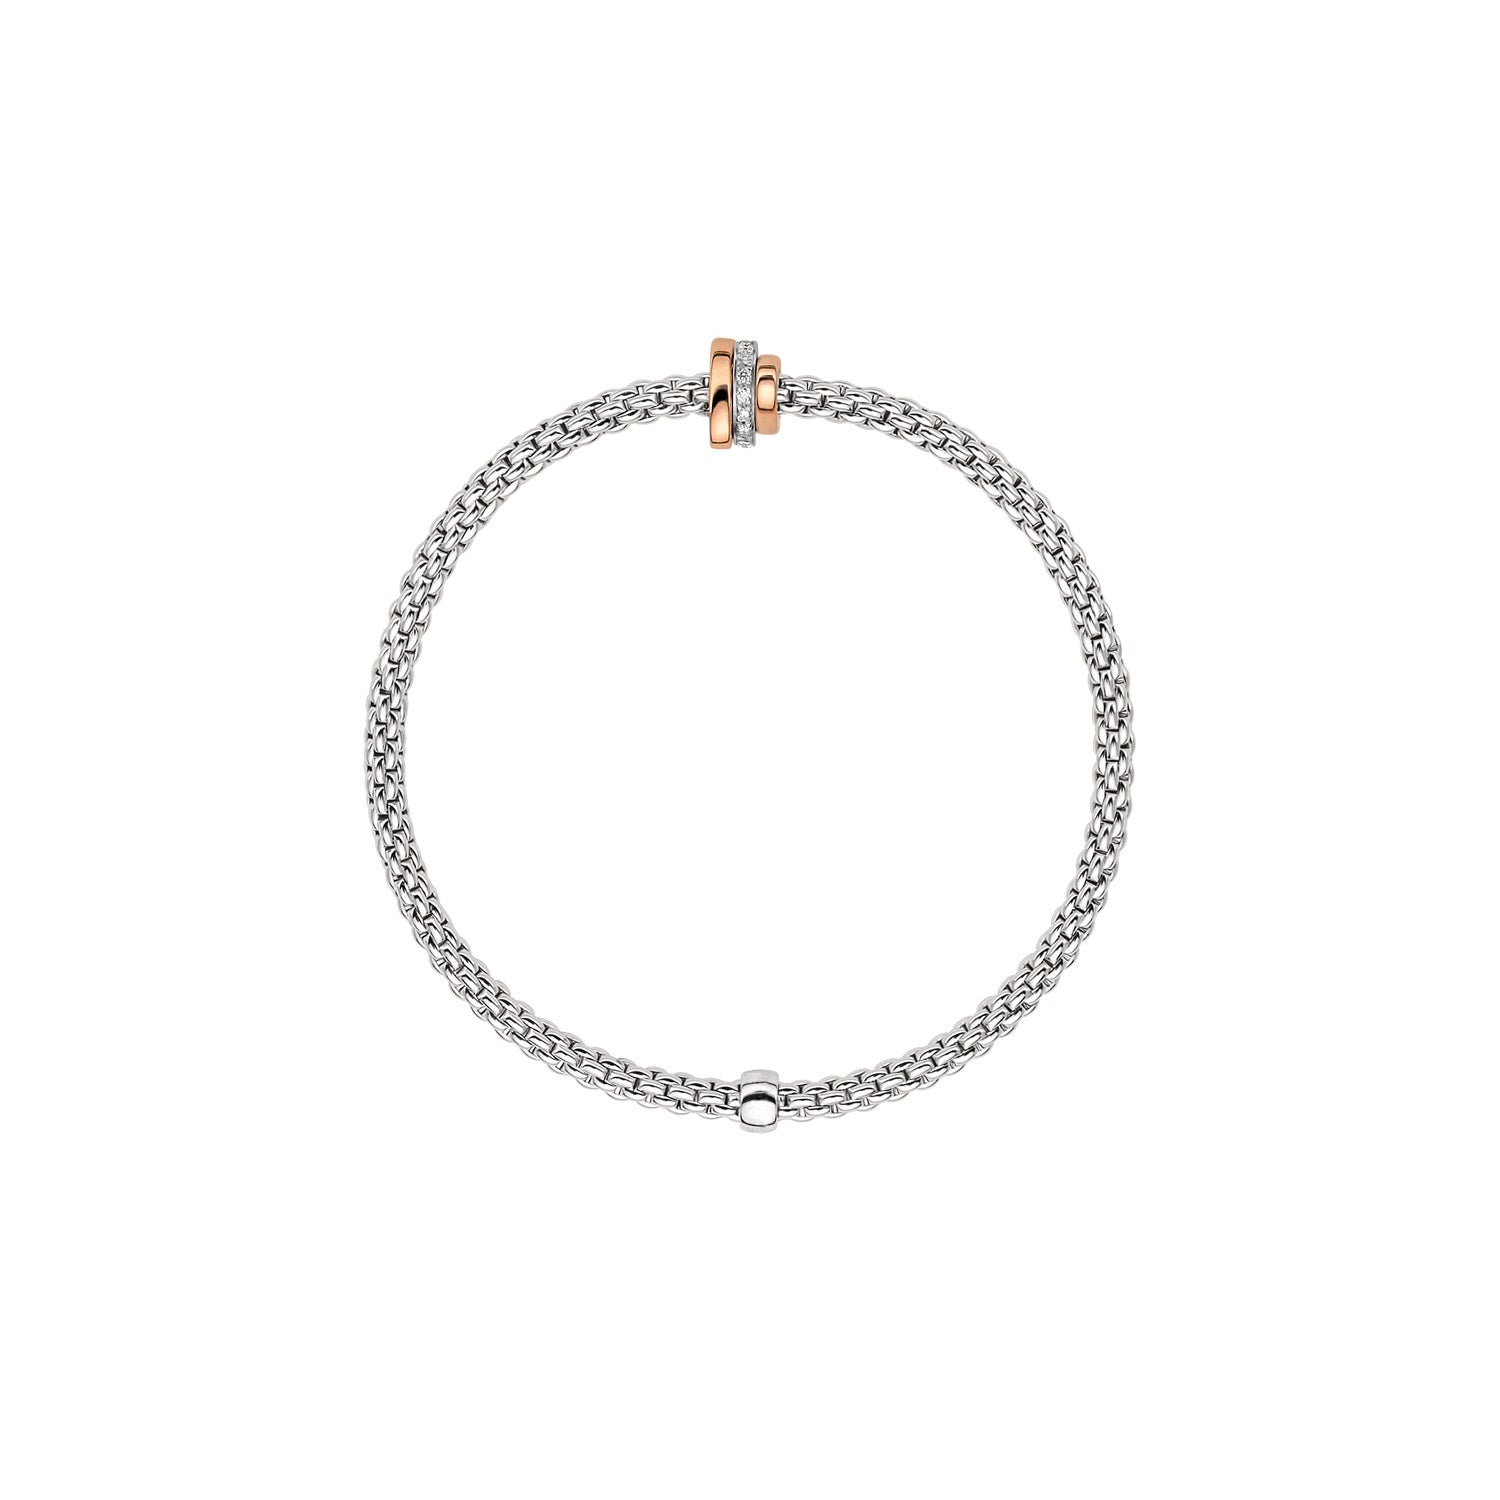 Flex'it Prima bracelet with diamonds in white and rose gold